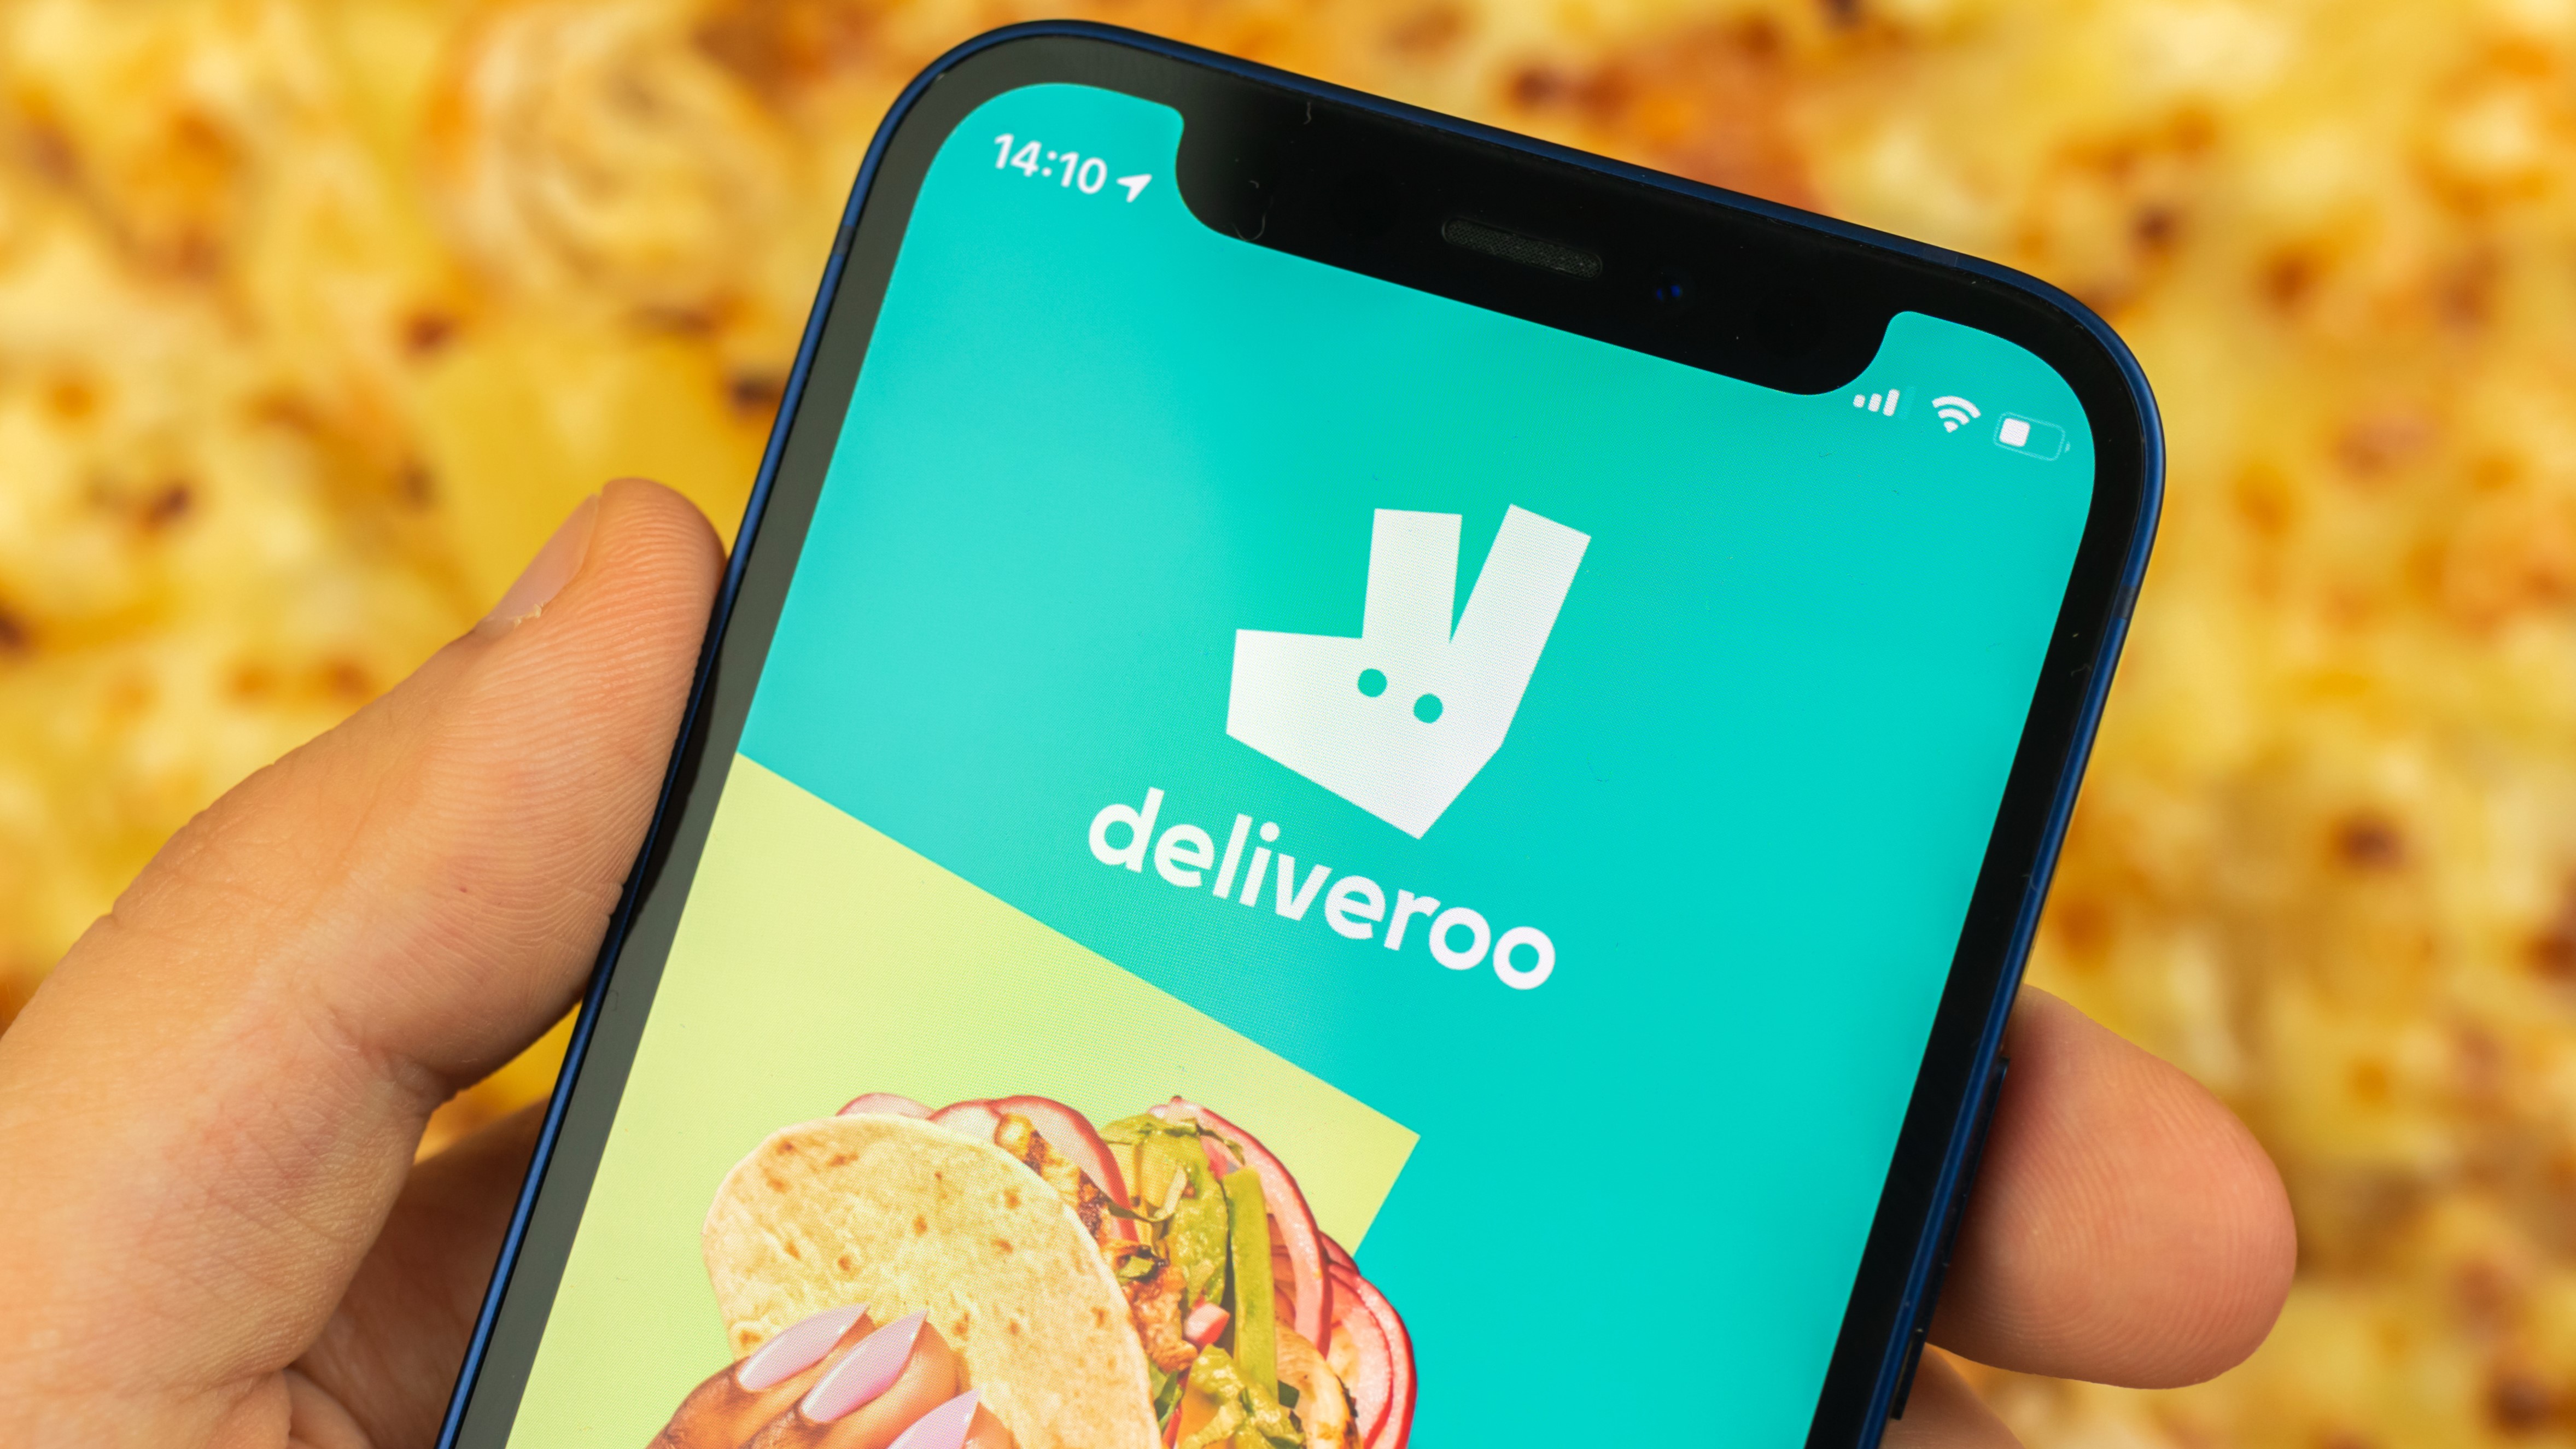 A picture of Deliveroo on an iPhone